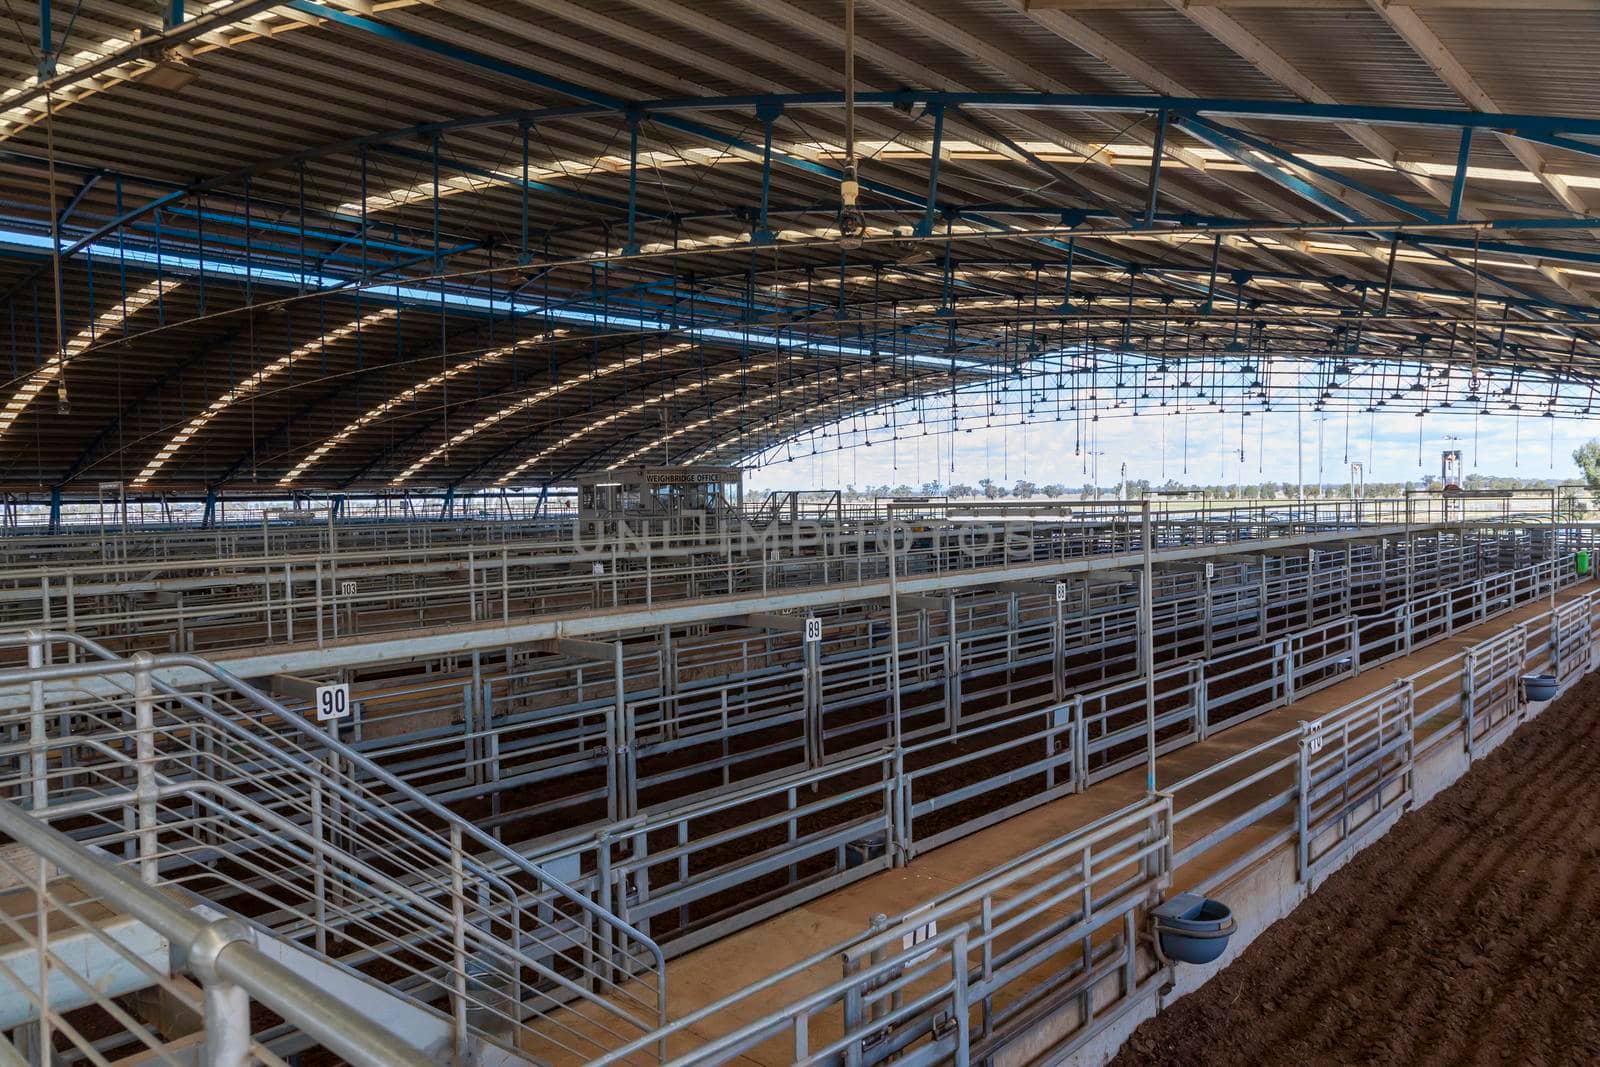 The Central West Livestock Exchange near Forbes in regional Australia by WittkePhotos